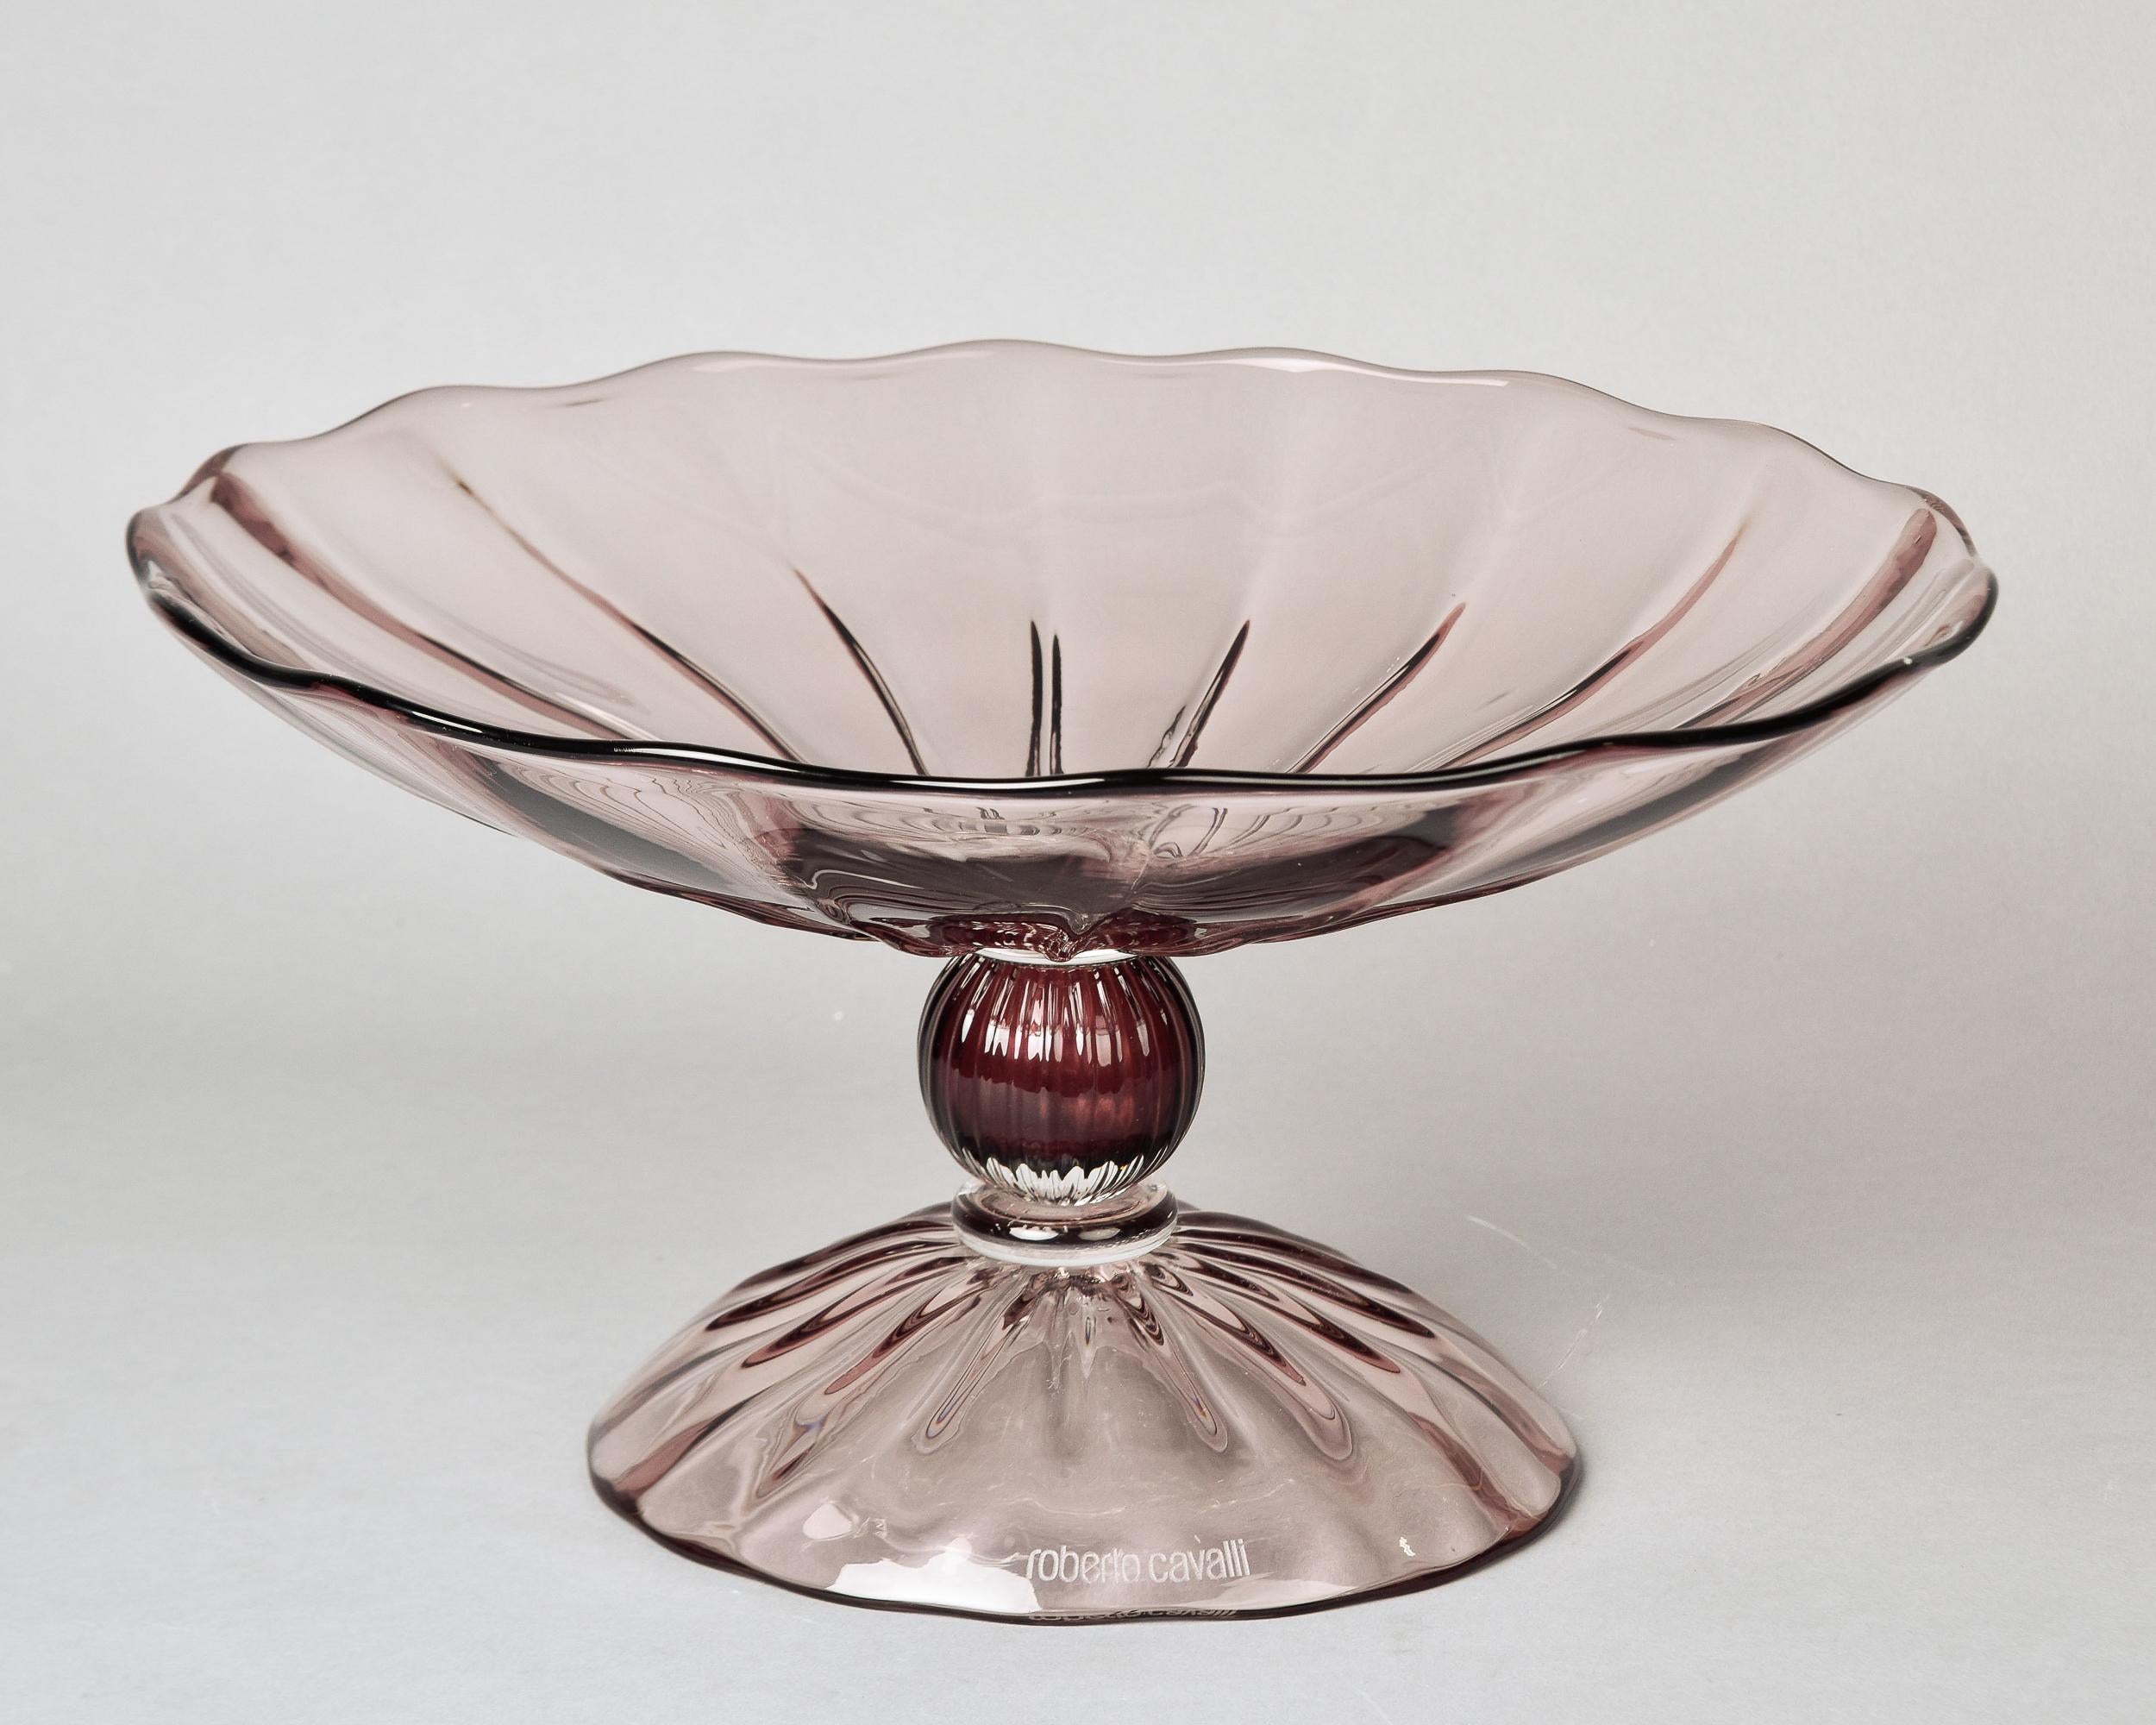 Large Vintage Signed Roberto Cavalli Pale Amethyst Glass Tazza or Pedestal Bowl In Excellent Condition For Sale In Troy, MI